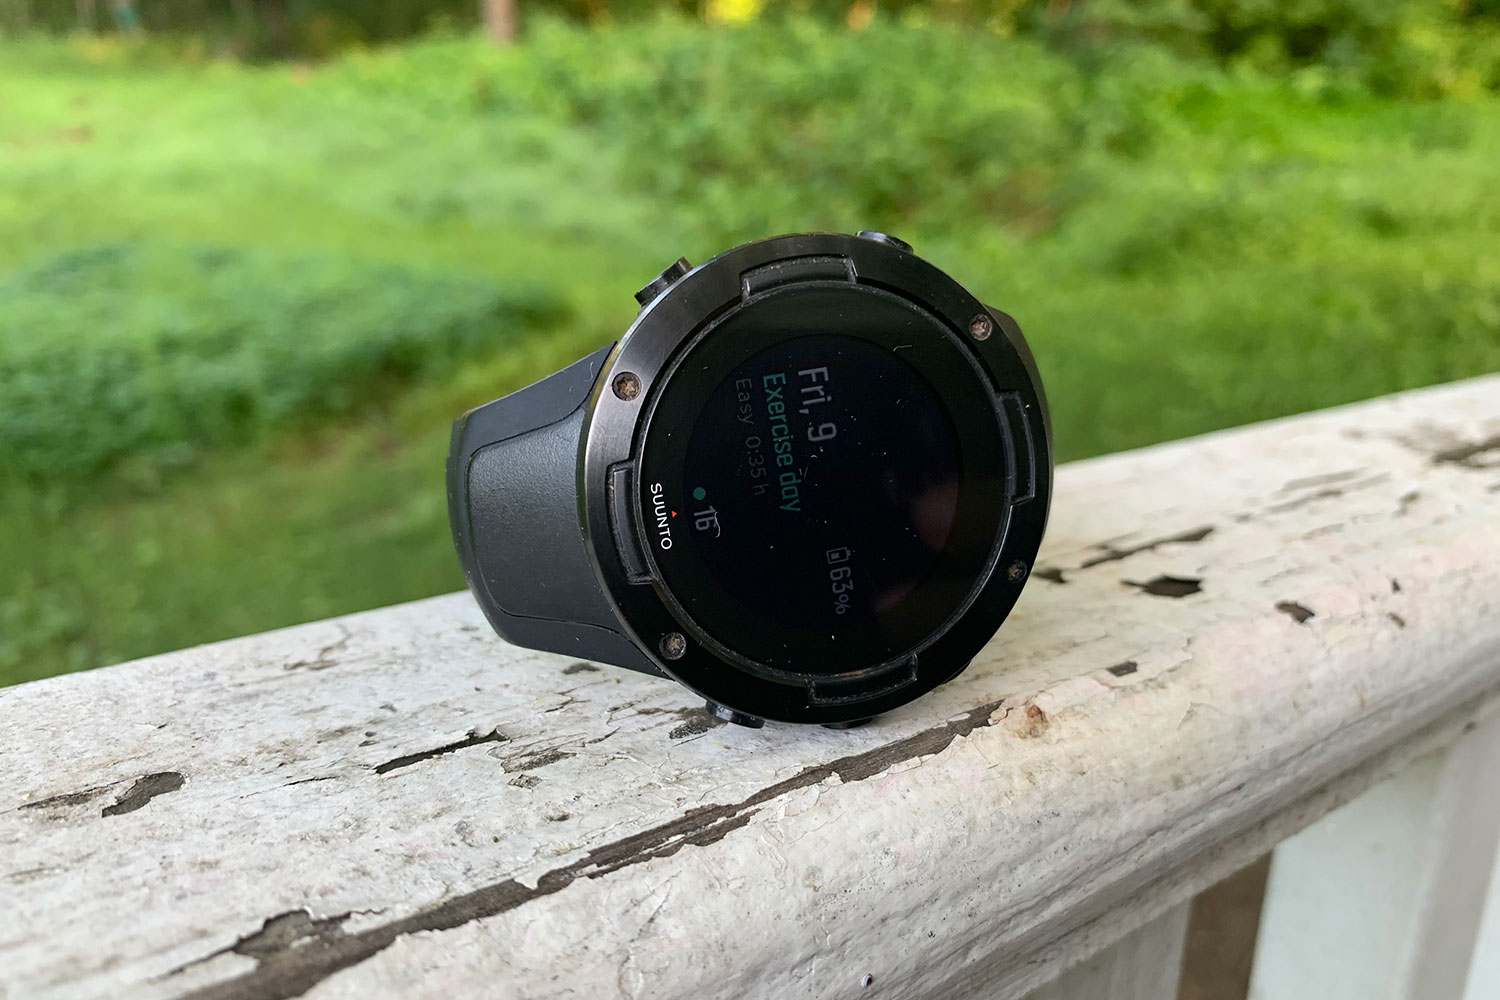 Can the Suunto 5 Peak Level up Your Exercise Game?